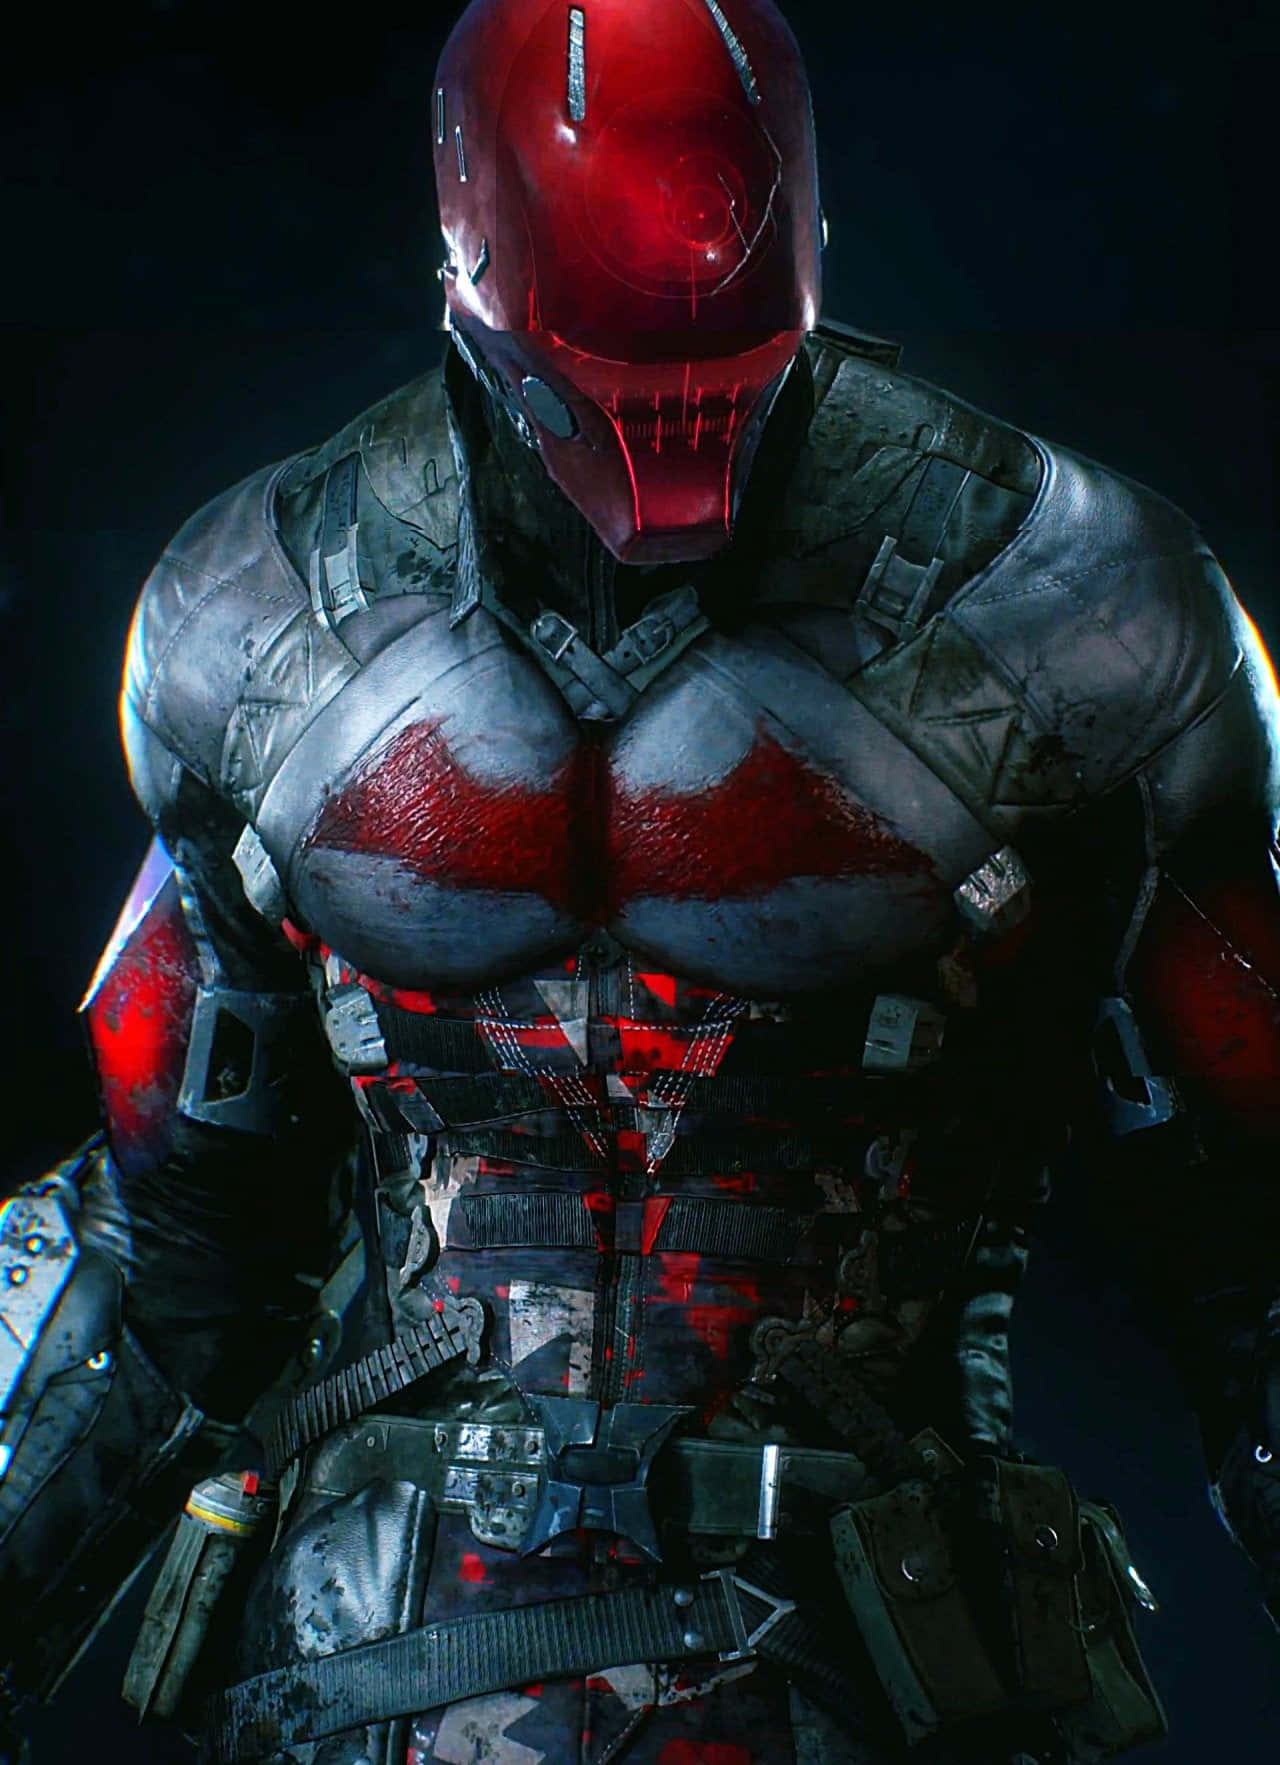 Step into the shoes of Red Hood, the daring vigilante